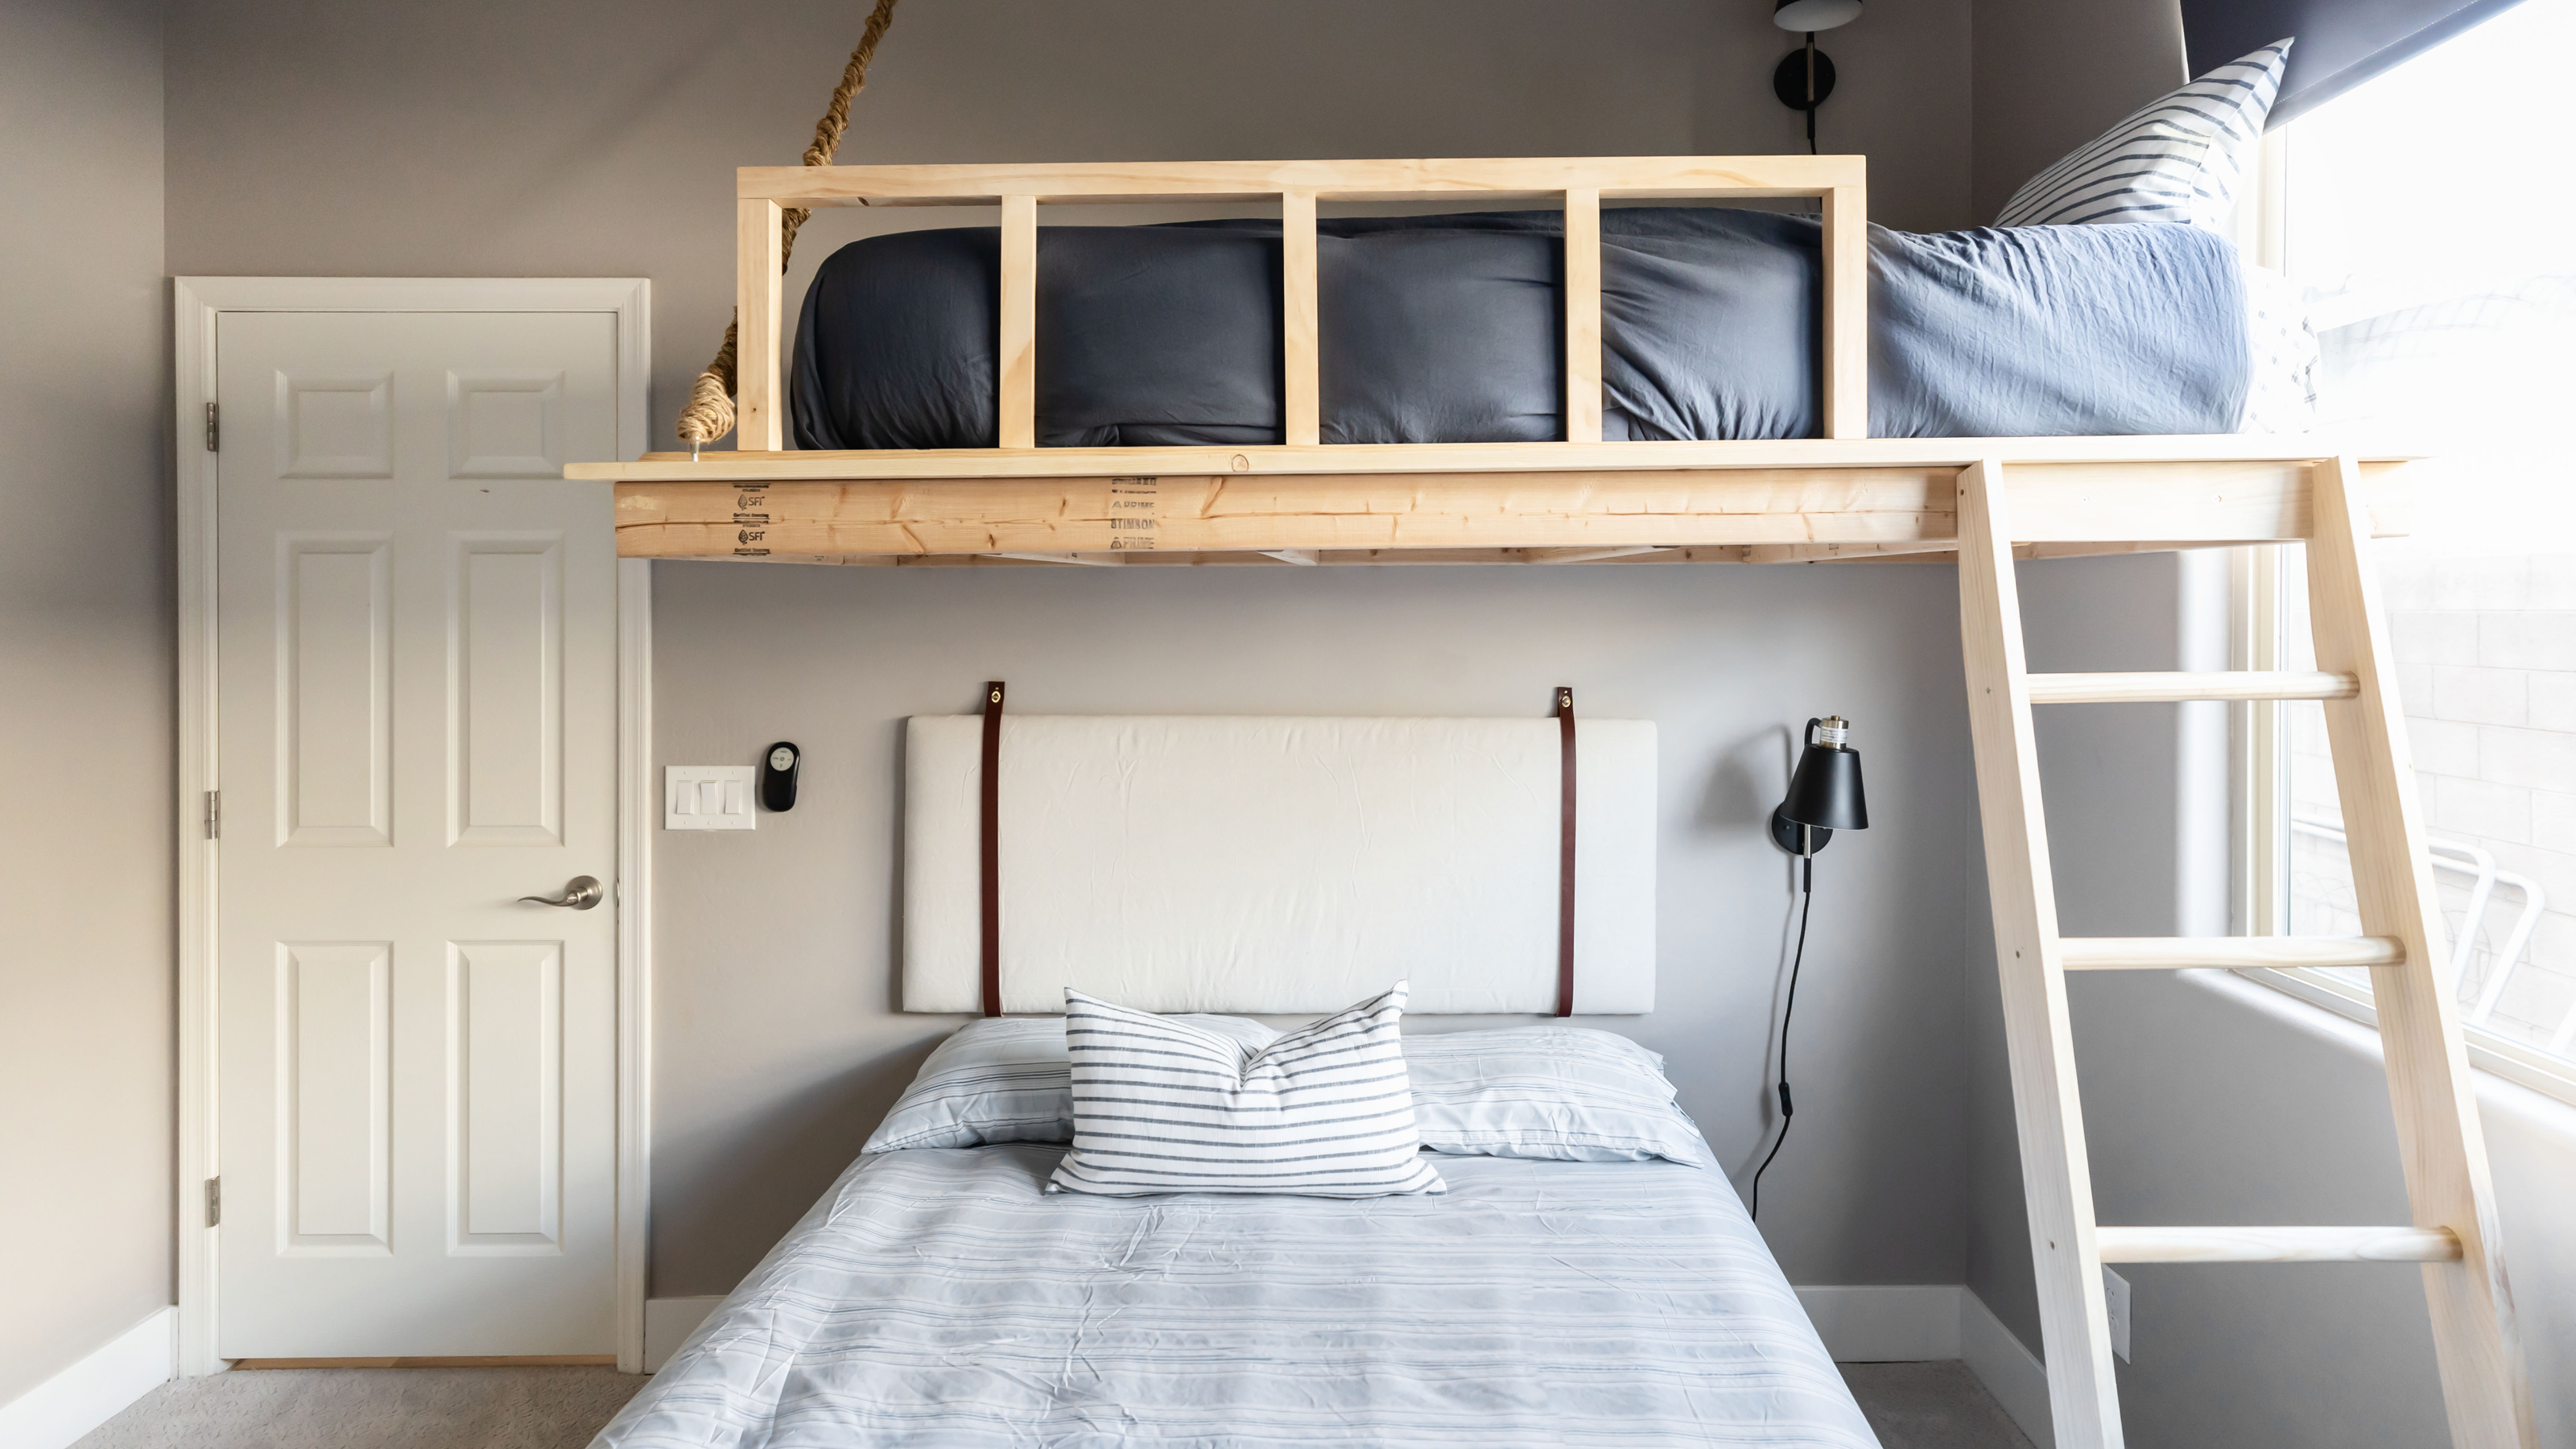 How To Build A Loft Bed Diy With This, How To Put A Bunk Bed Together